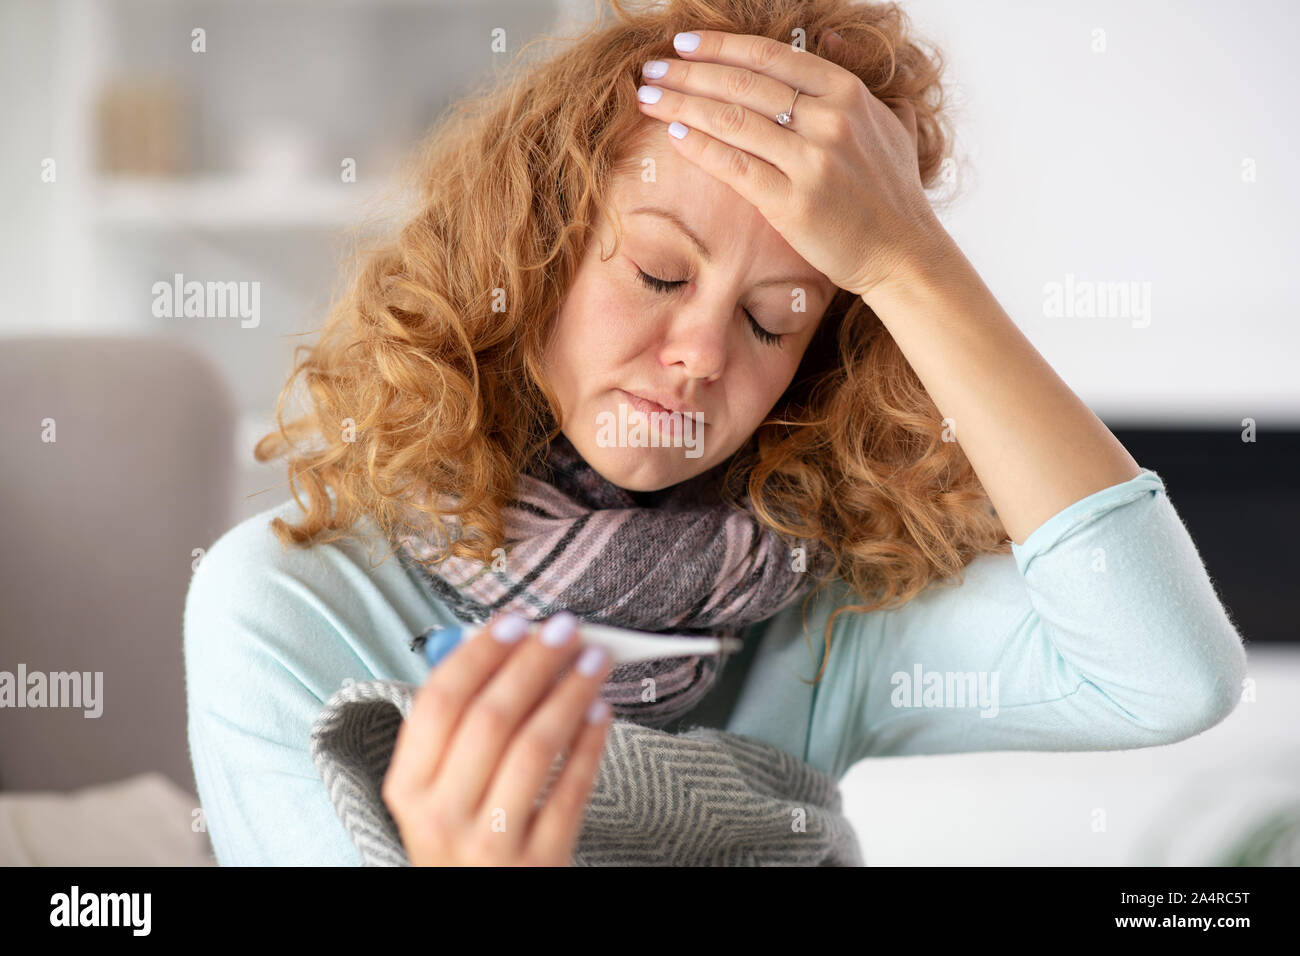 Woman feeling terrible while touching her forehead and having fever Stock Photo